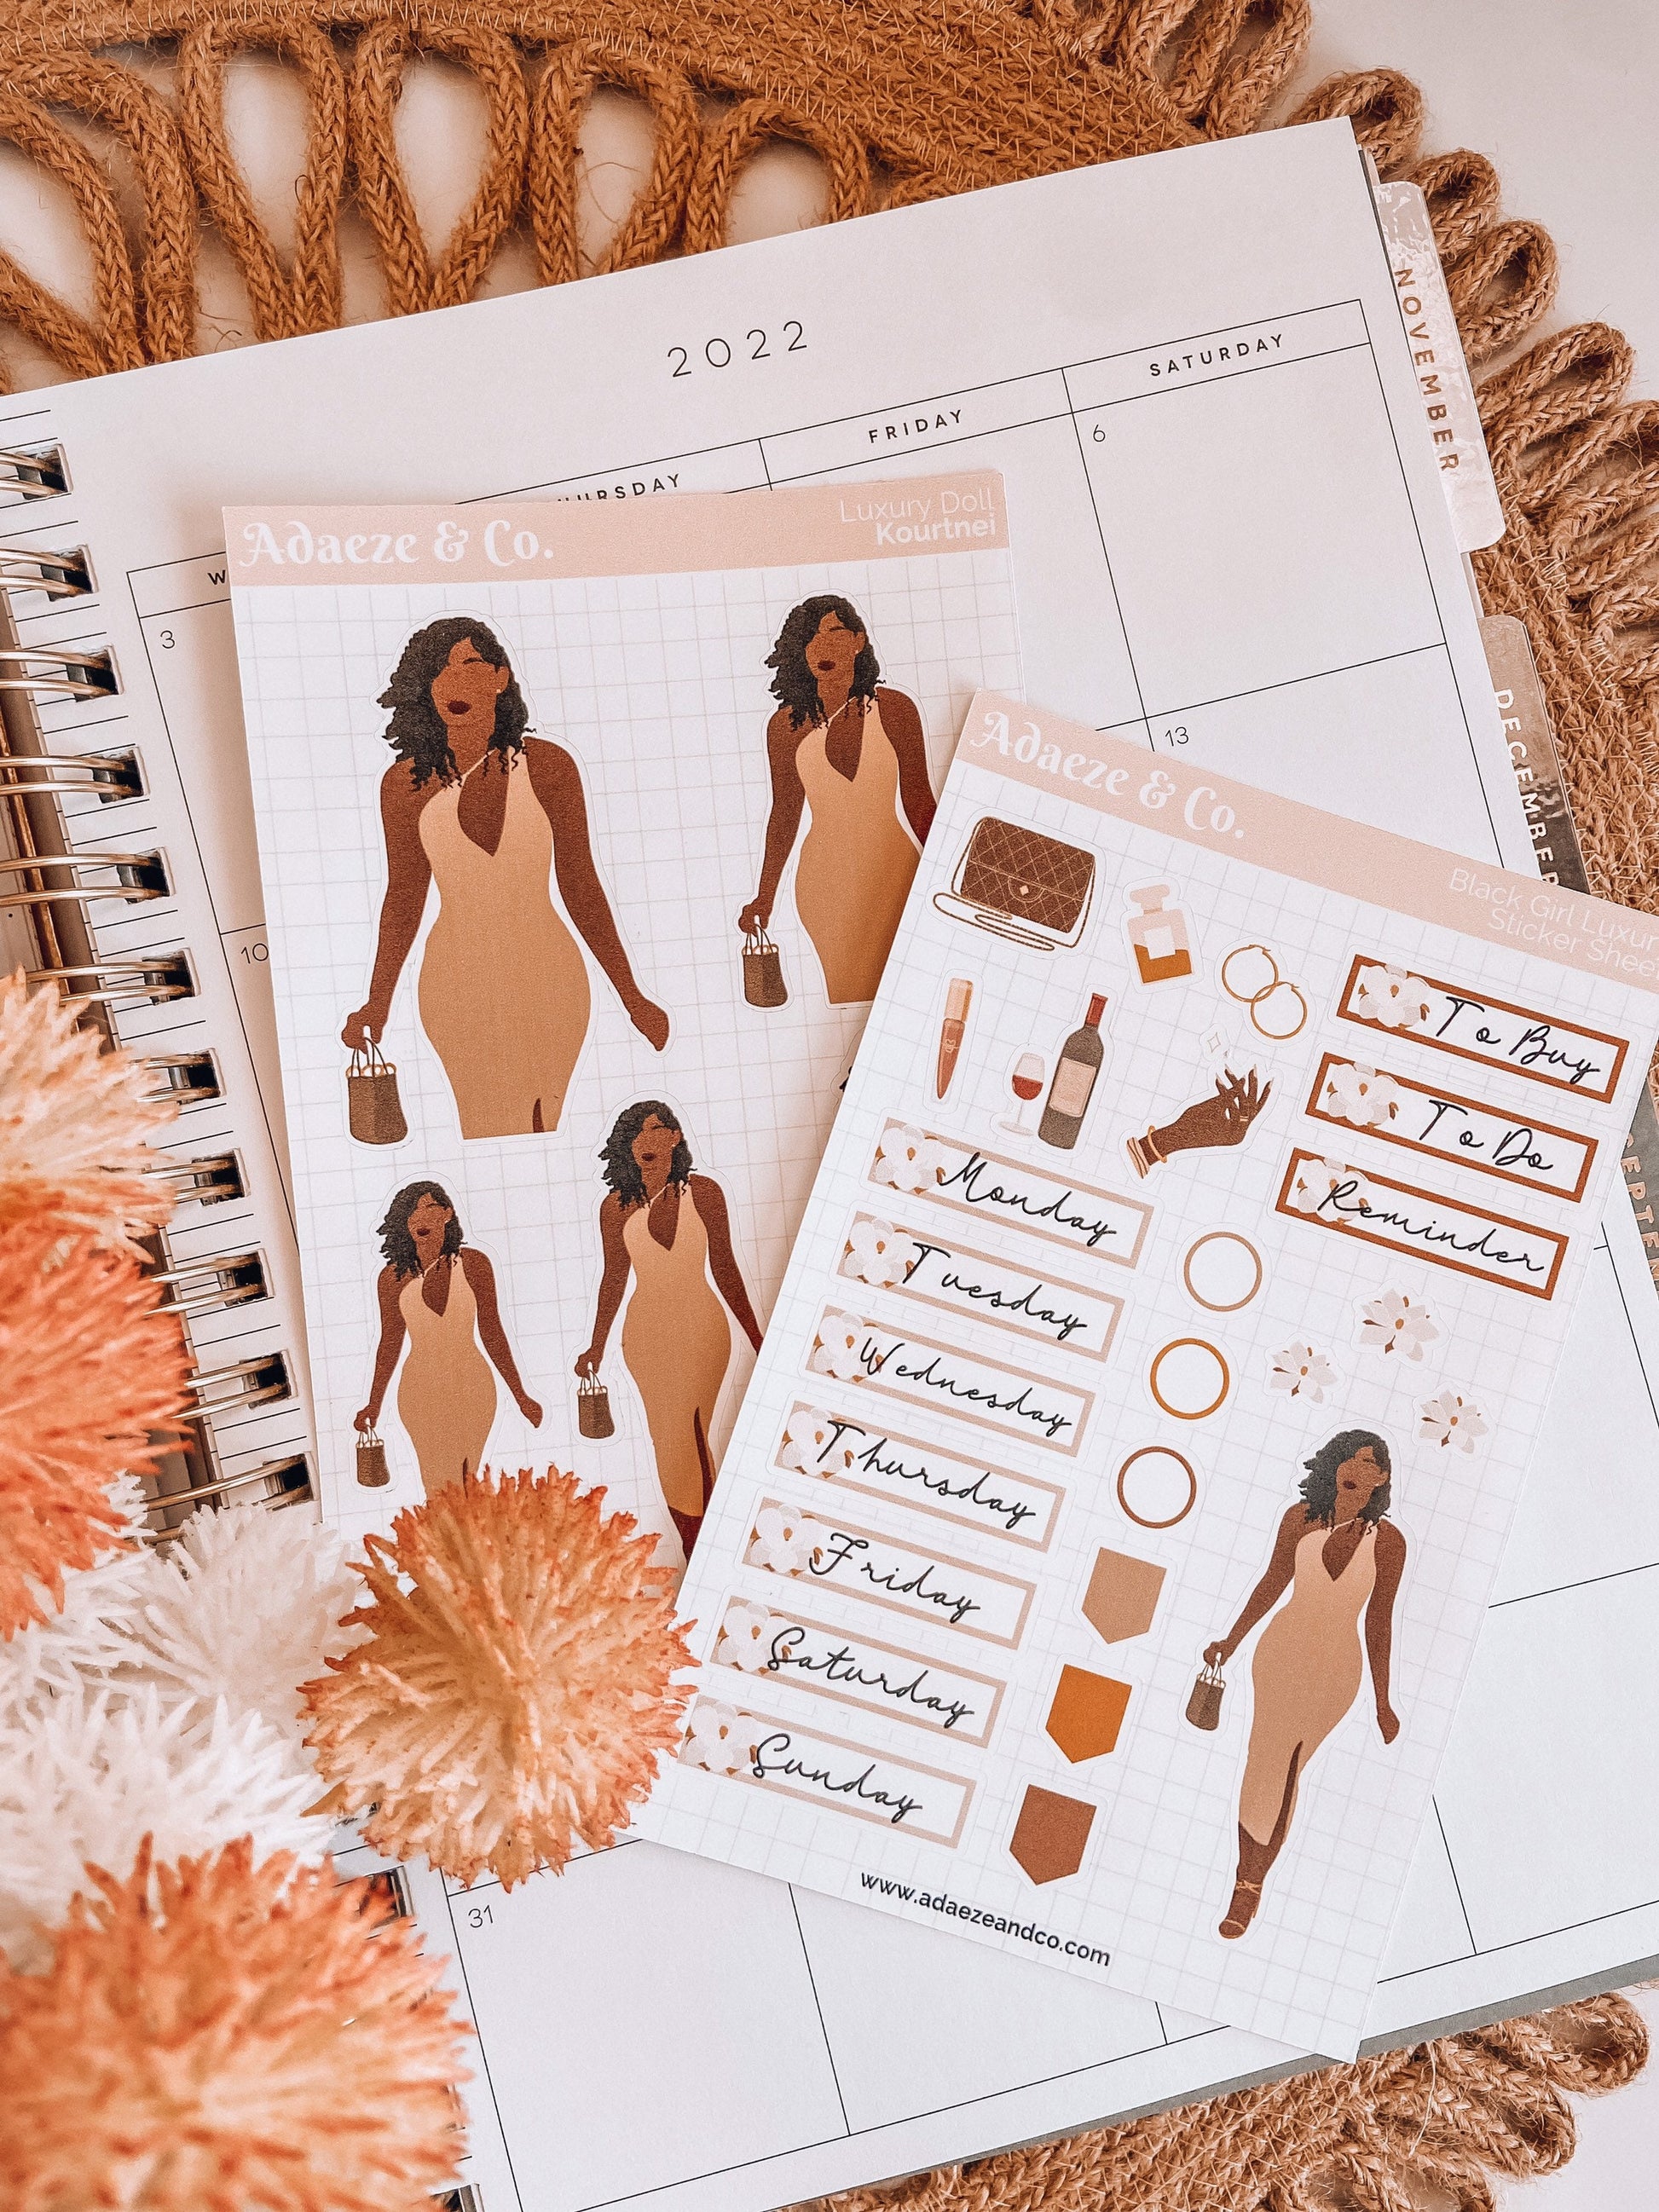 Black Girl Planner Stickers, Black Women, African American Planner Sticker  Sheets for Any Size Planners, Journals or Notebooks | Hey Val